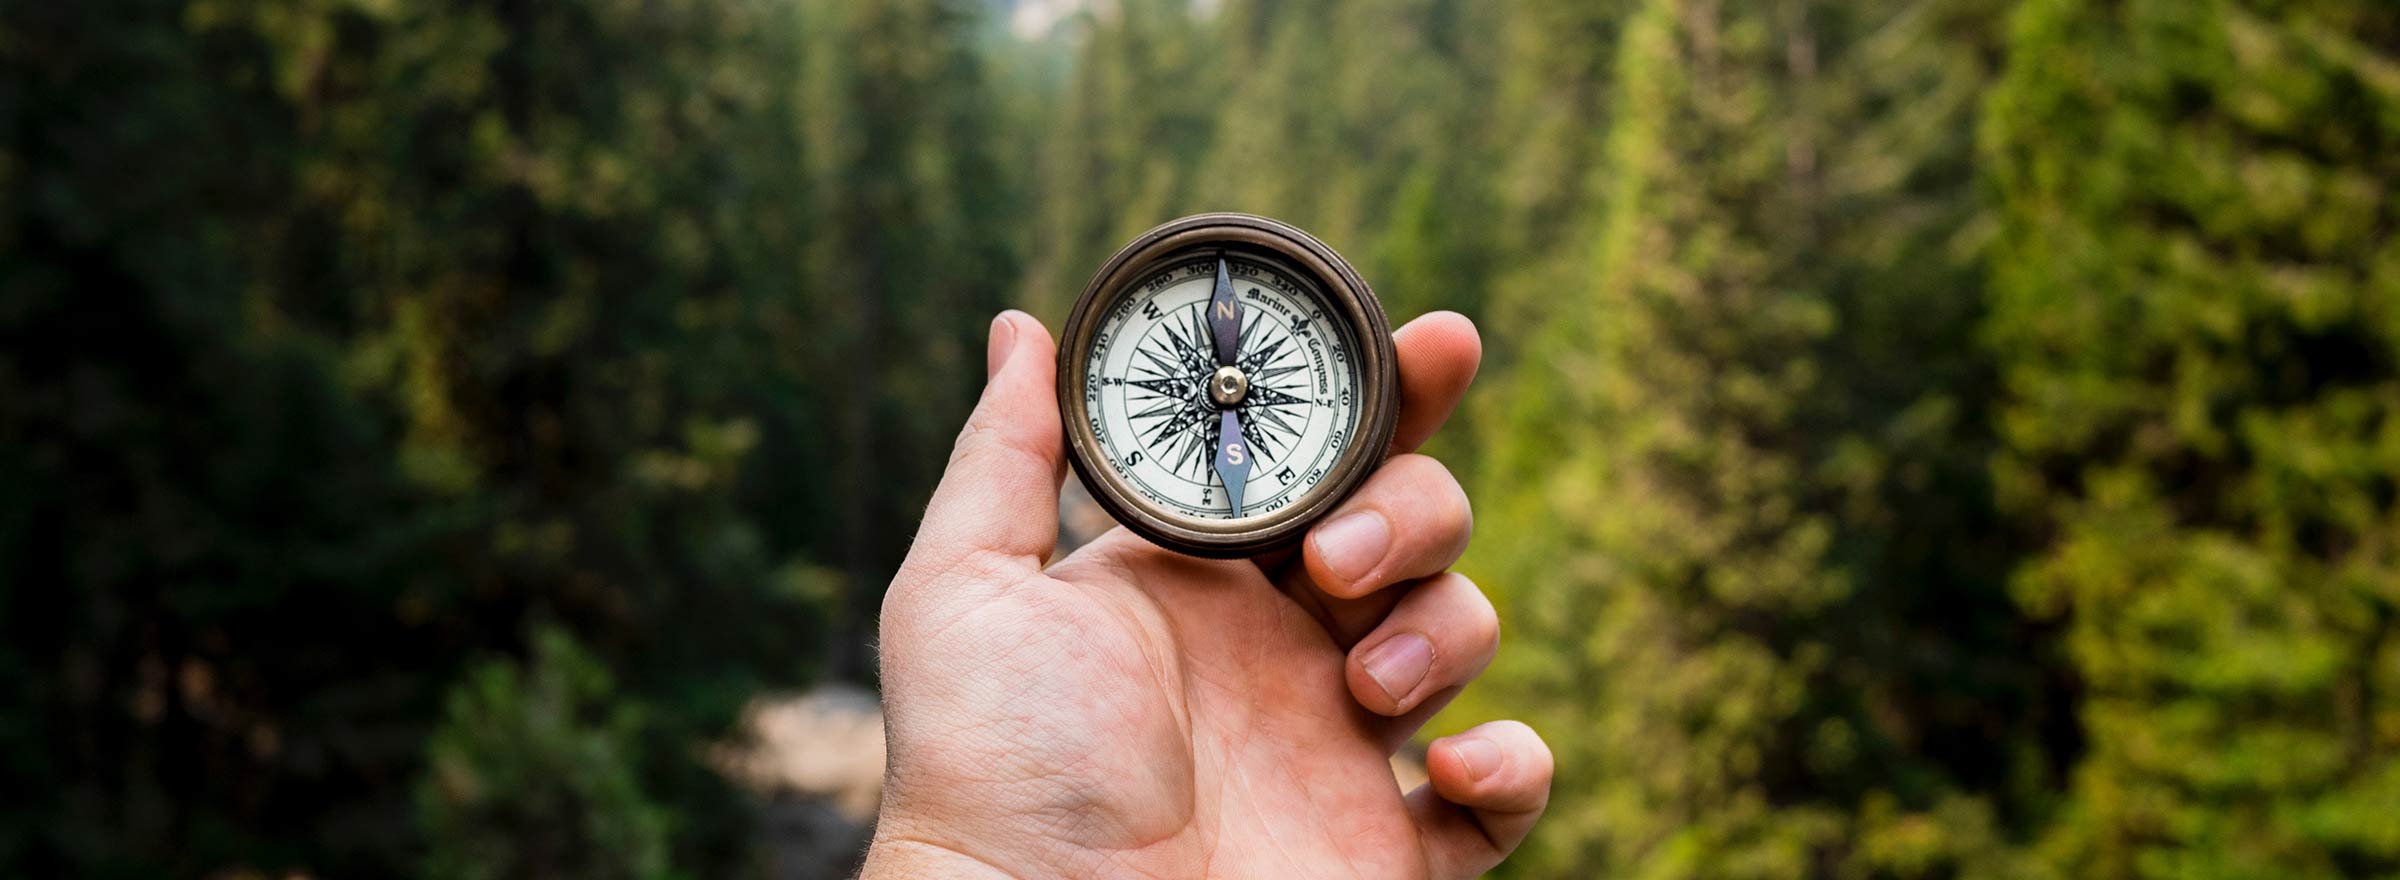 person in a forest holding a compass, representing what nonprofits can gain from TechSoup services